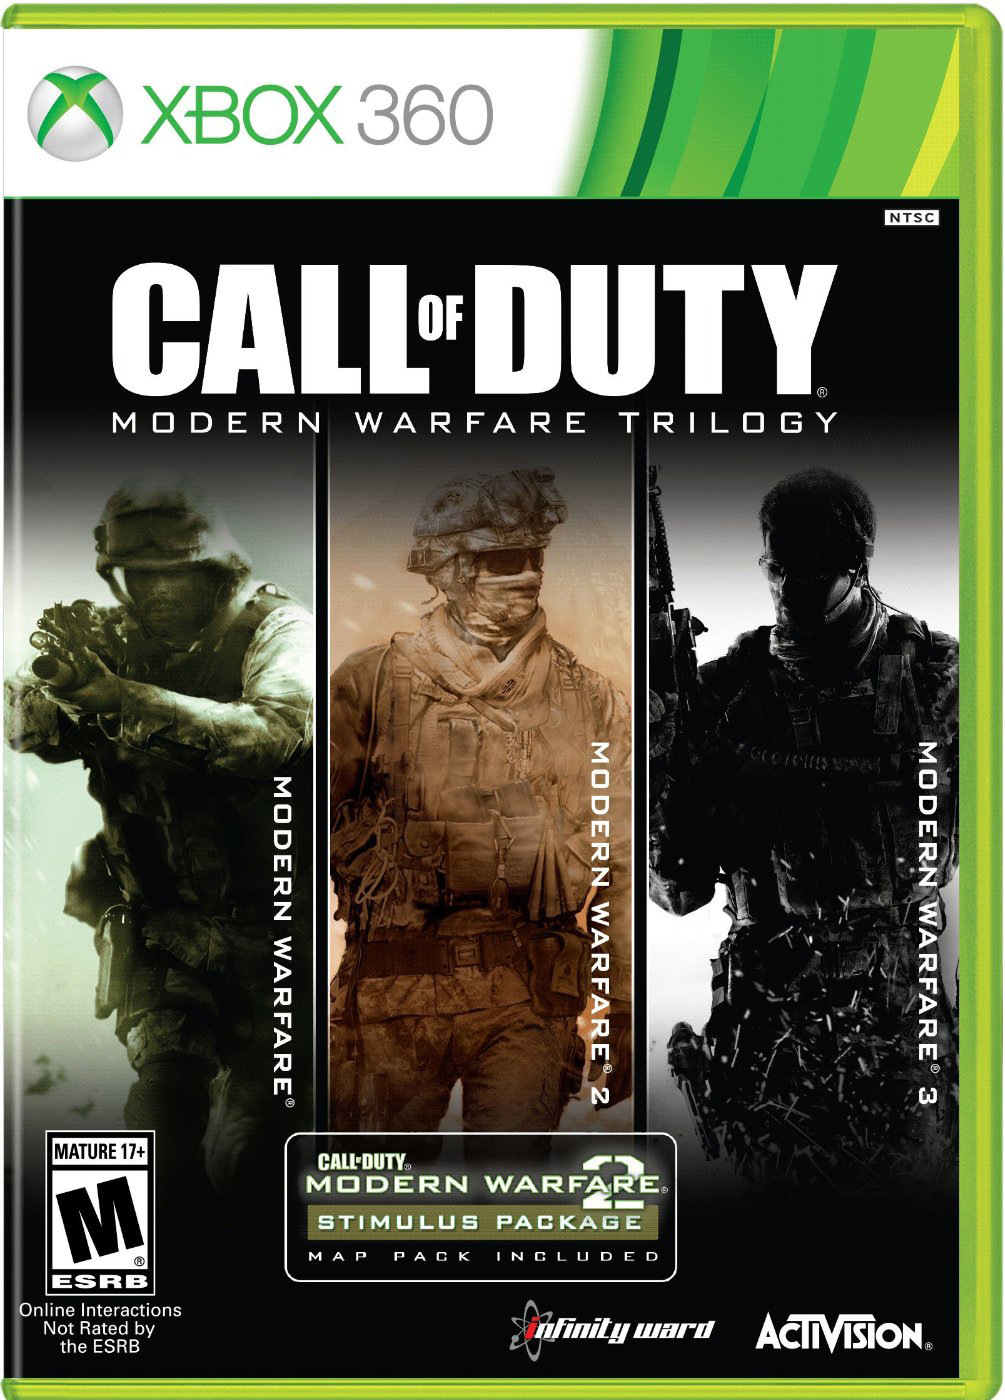 Call of Duty: MW Trilogy